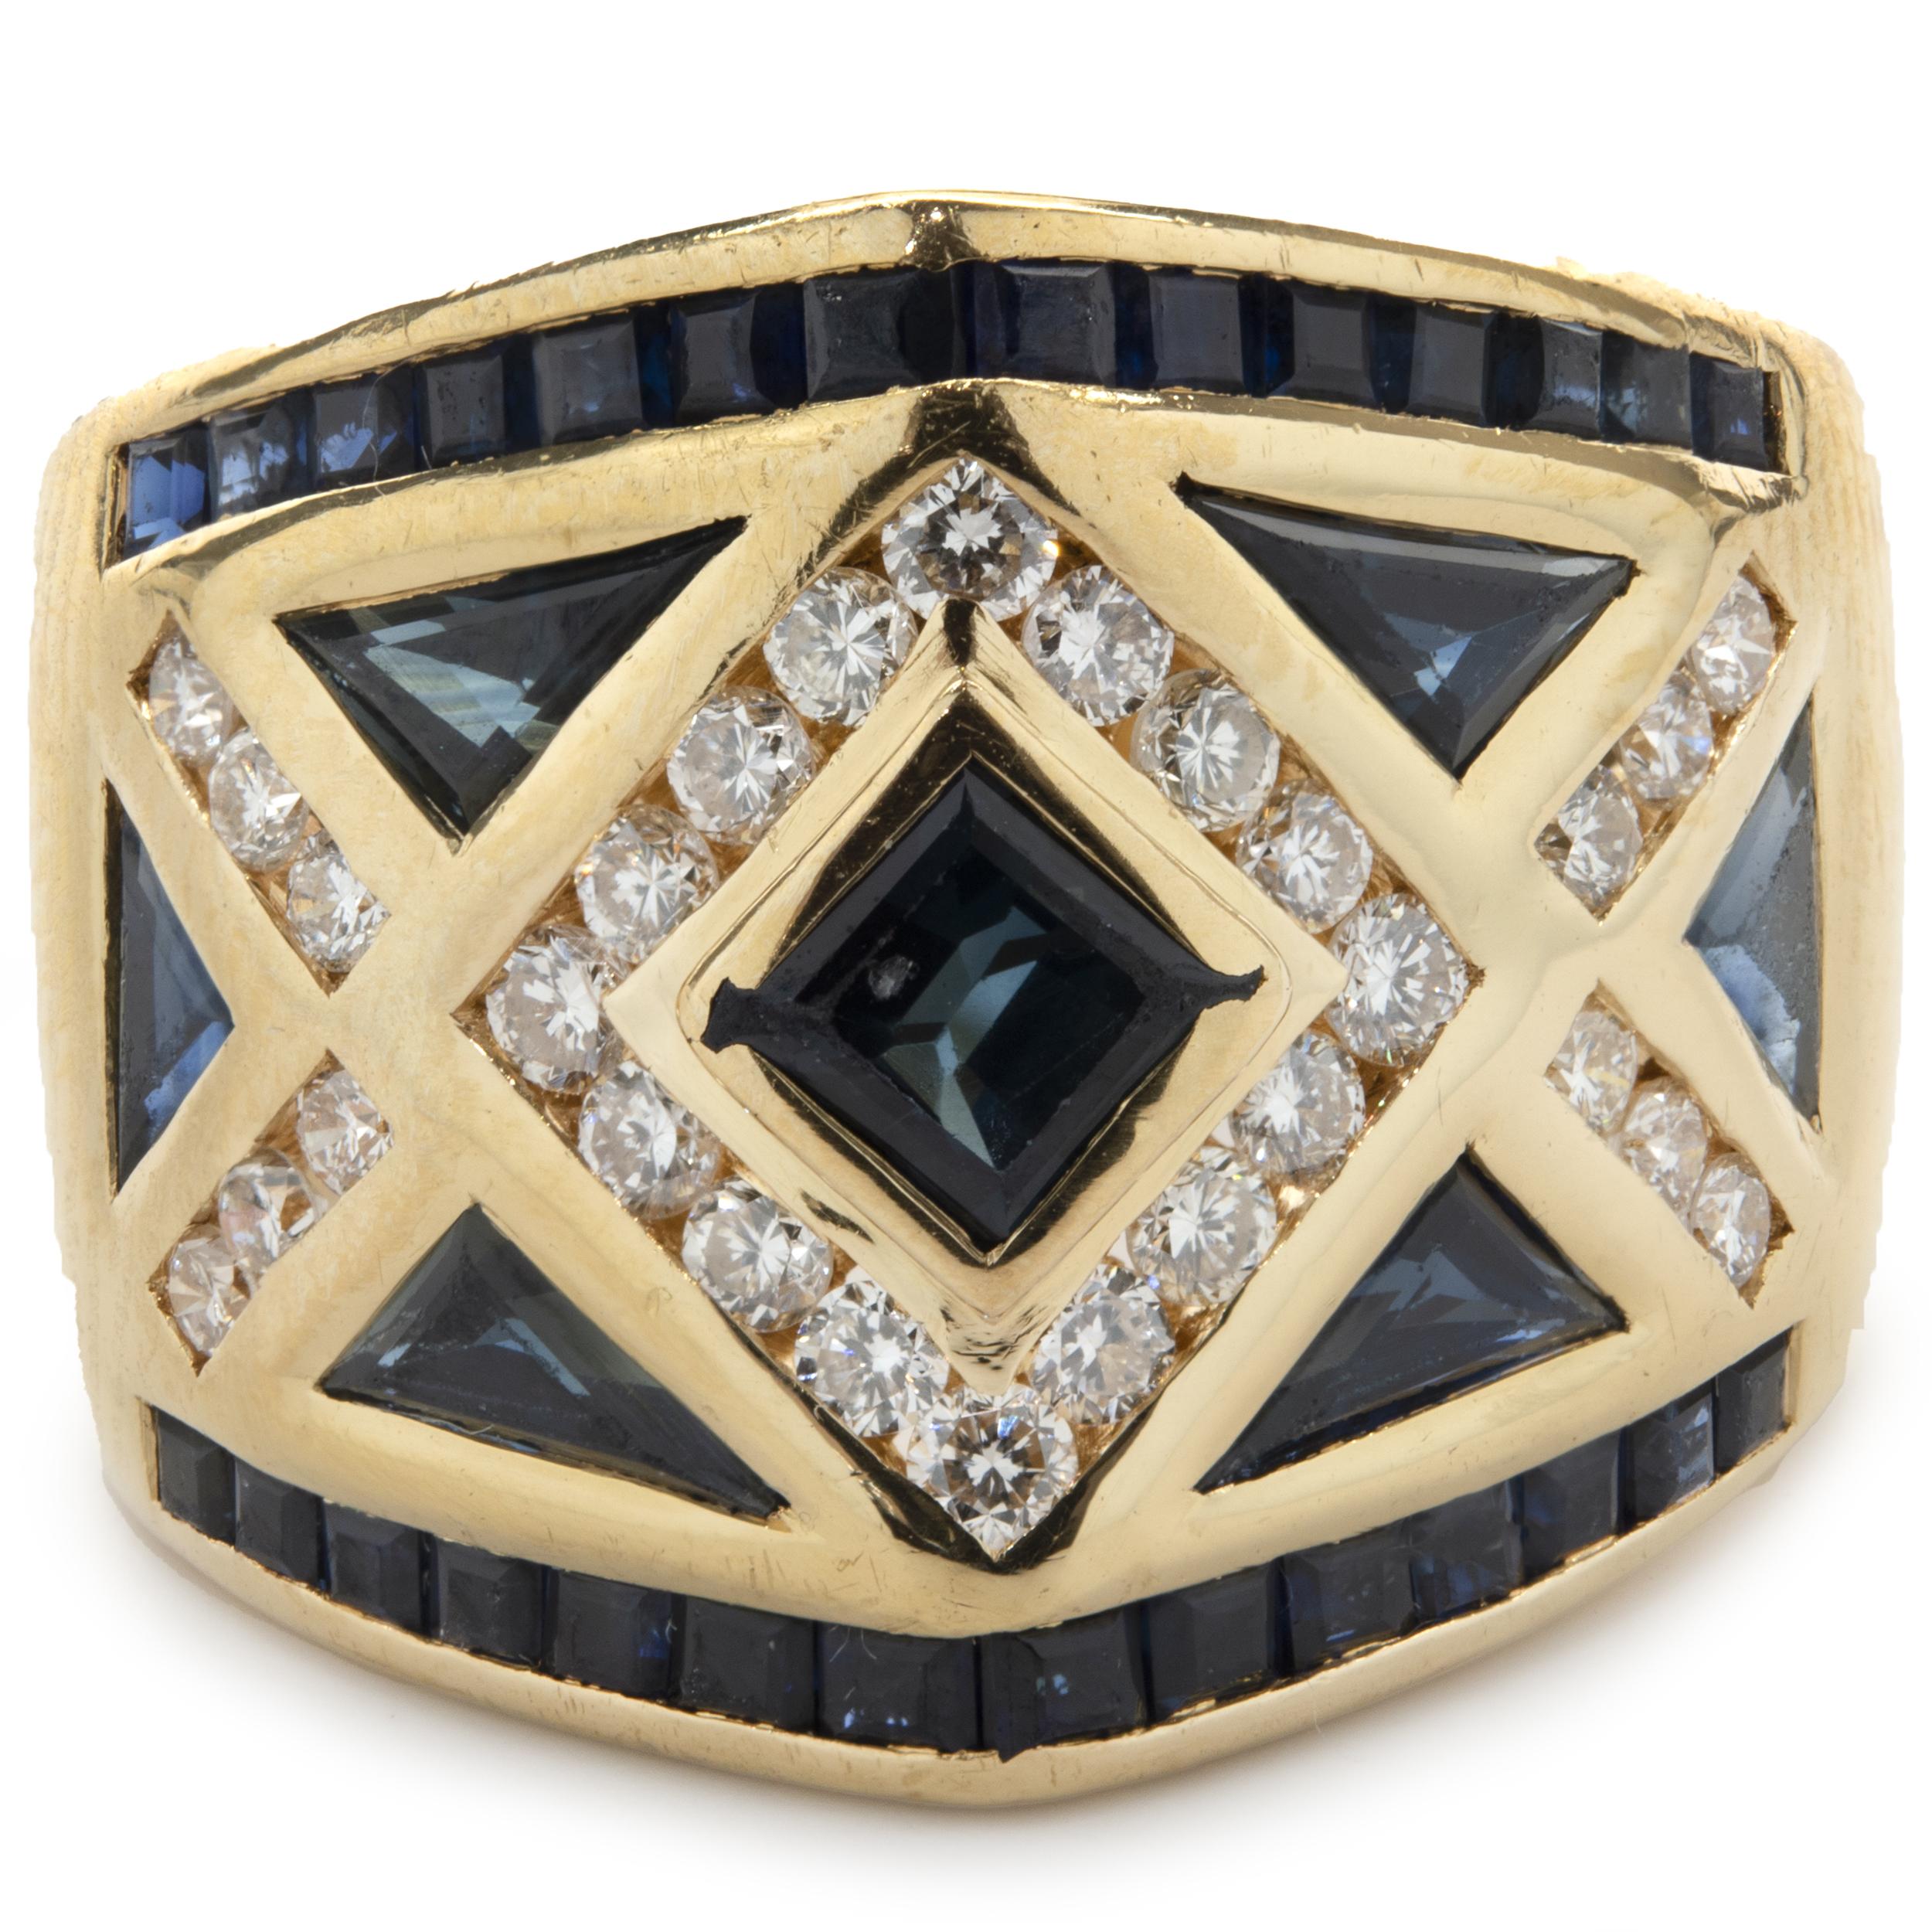 Designer: custom
Material: 18K Yellow Gold
Dimensions: ring top measures 15mm
Sapphires: 35 multi cut
Diamond: 28 round brilliant cut = .42cttw
Color: G
Clarity: SI1
Ring Size: 4.5 (complimentary sizing available)
Weight: 8.42 grams